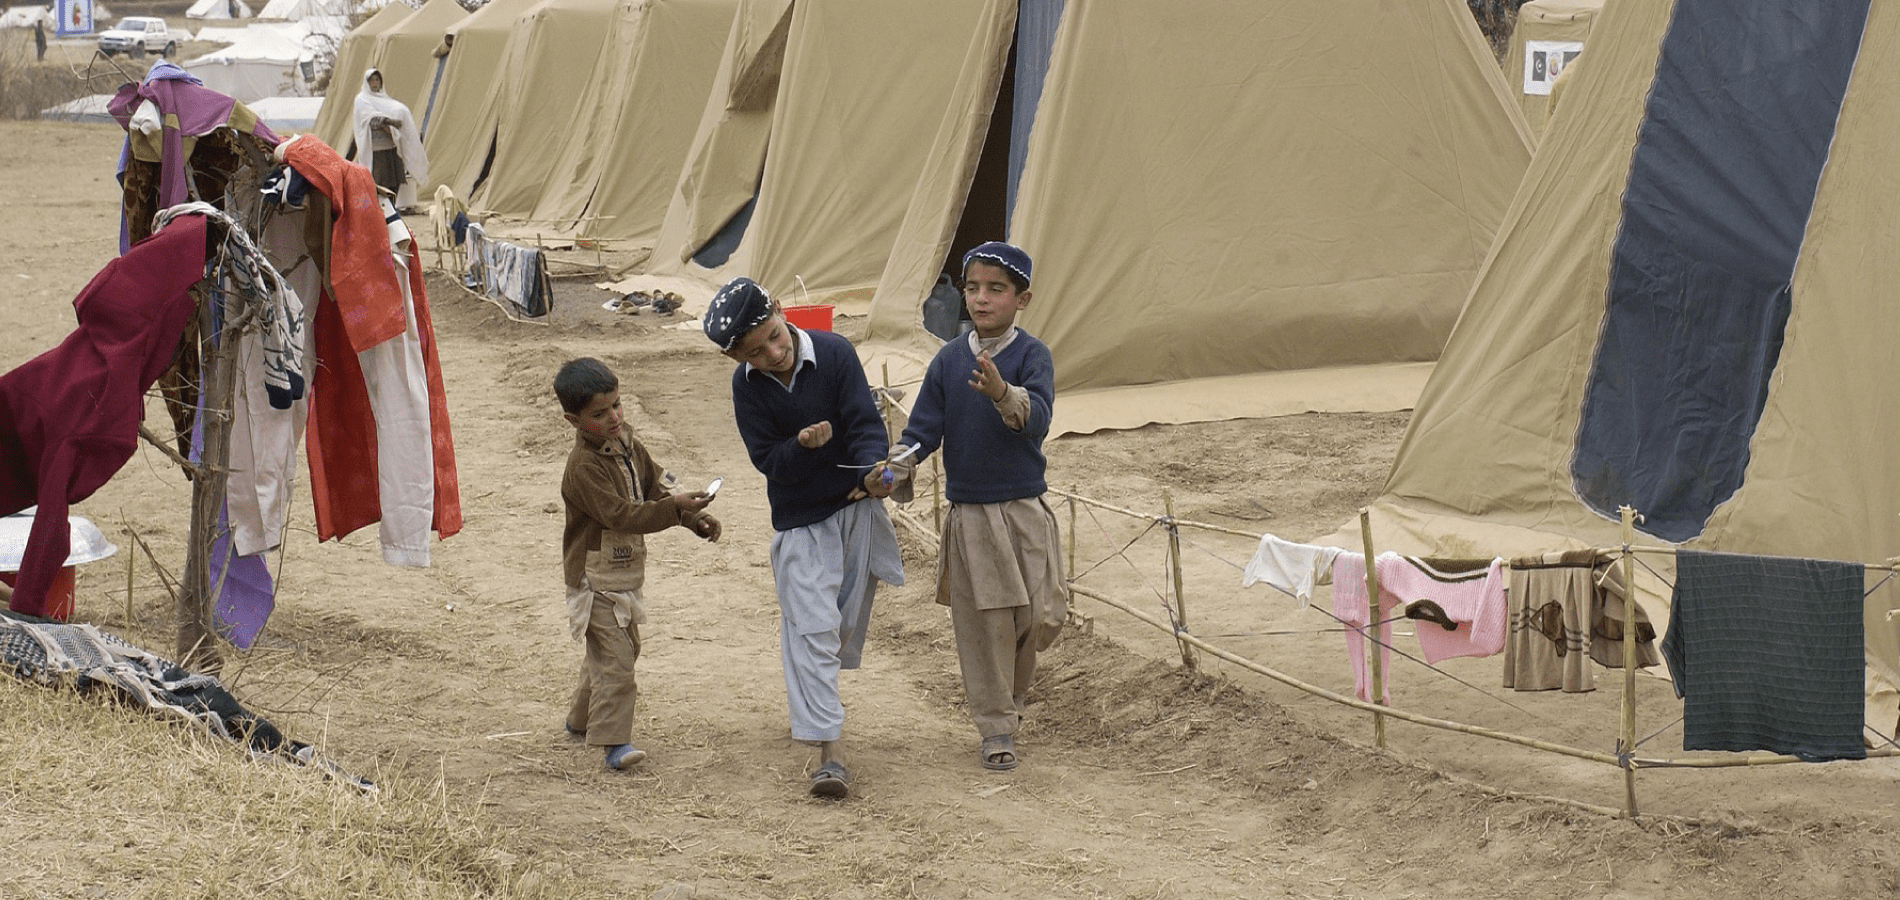 Refugee camp with kids